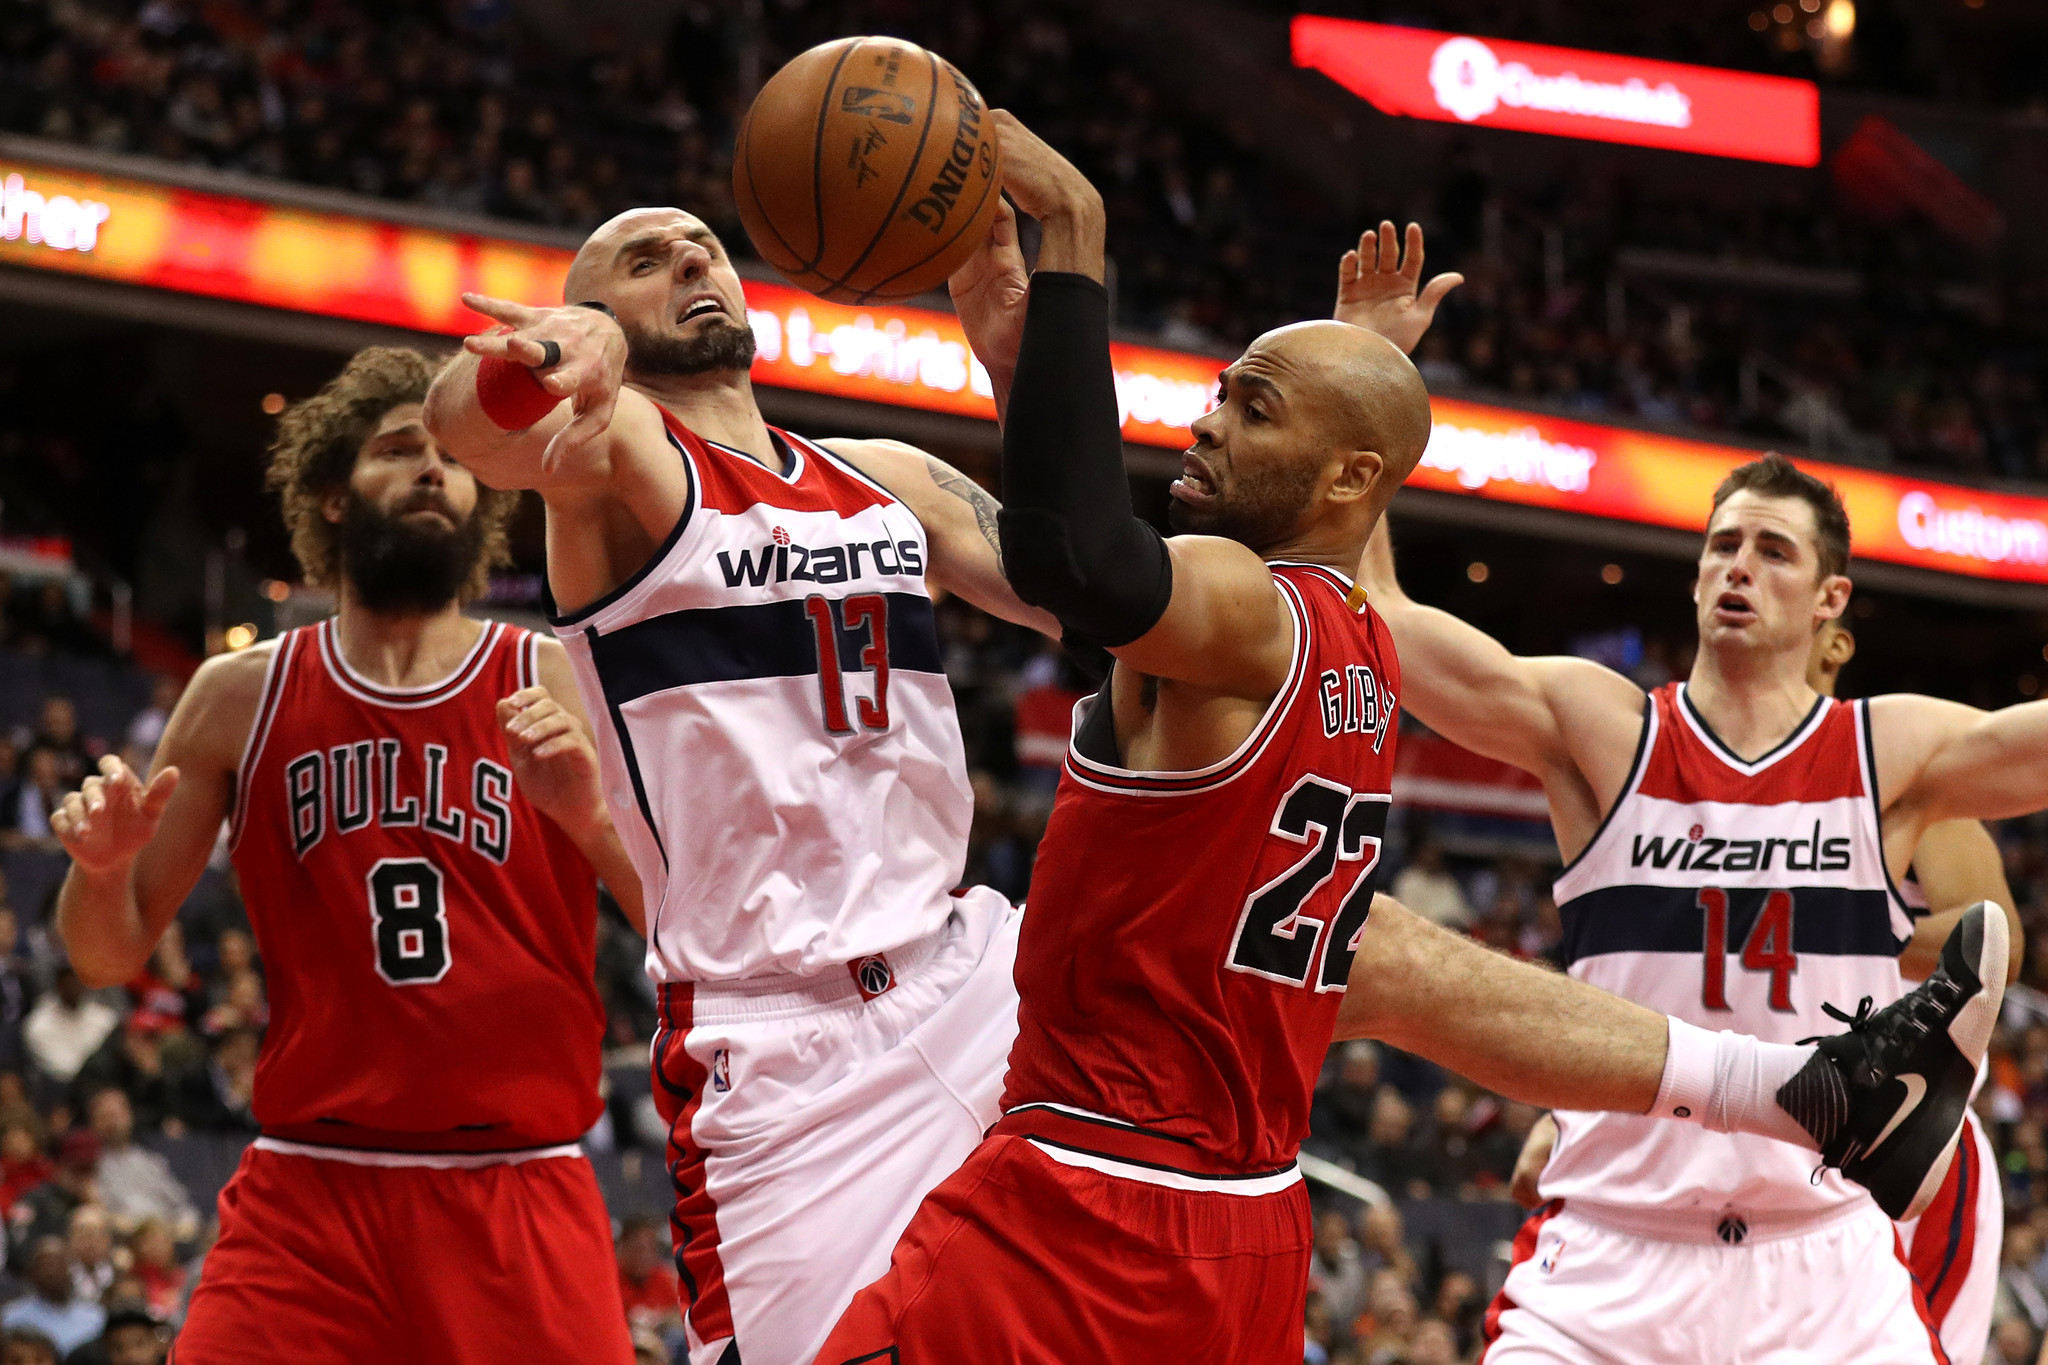 With Jimmy Butler and Dwyane Wade out, Bulls fall short against Wizards